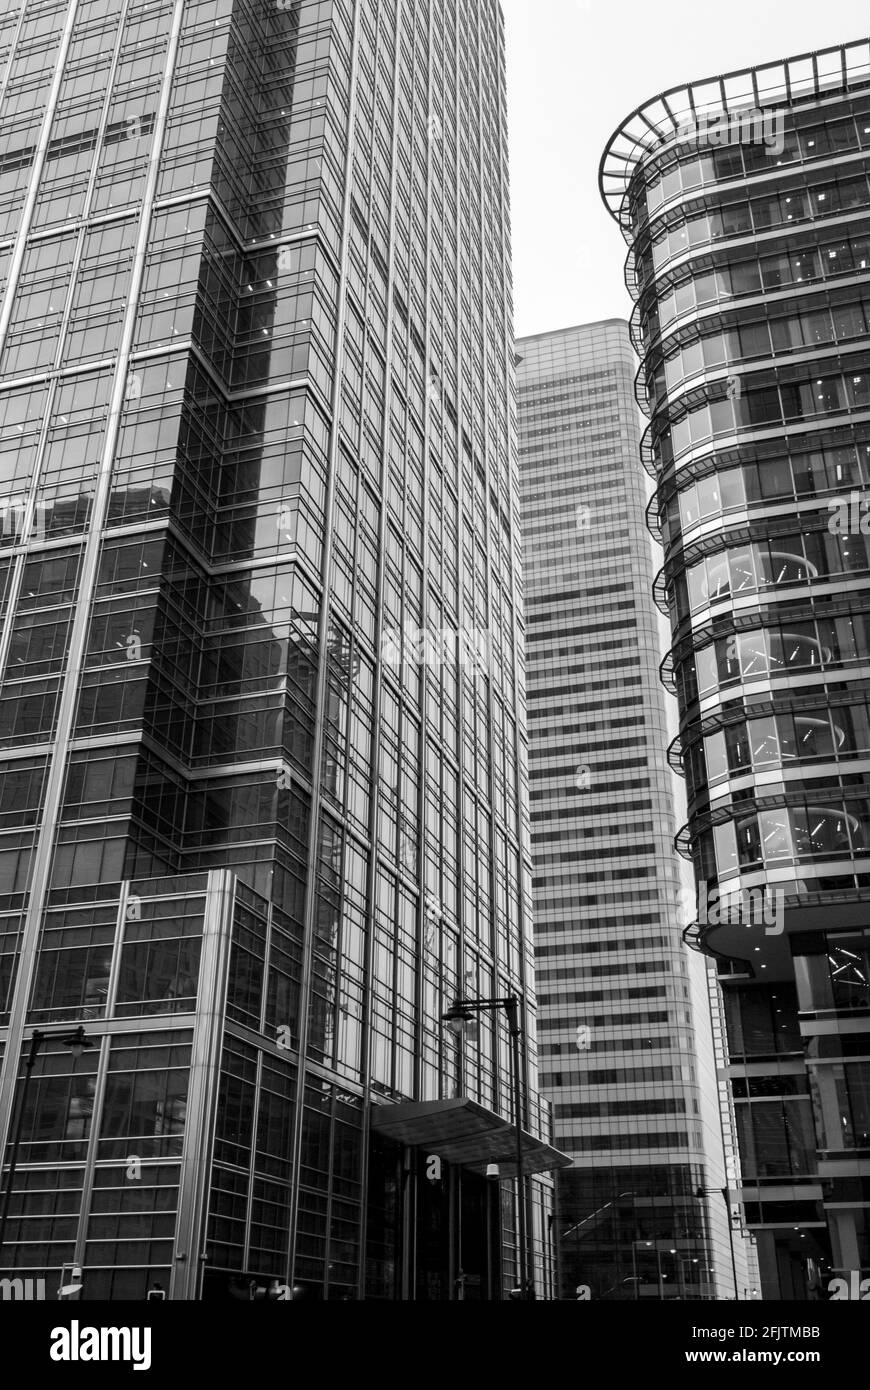 Looking up towards Canada Place and Montgomery Street in Canary Wharf, London, UK. B&W. Stock Photo